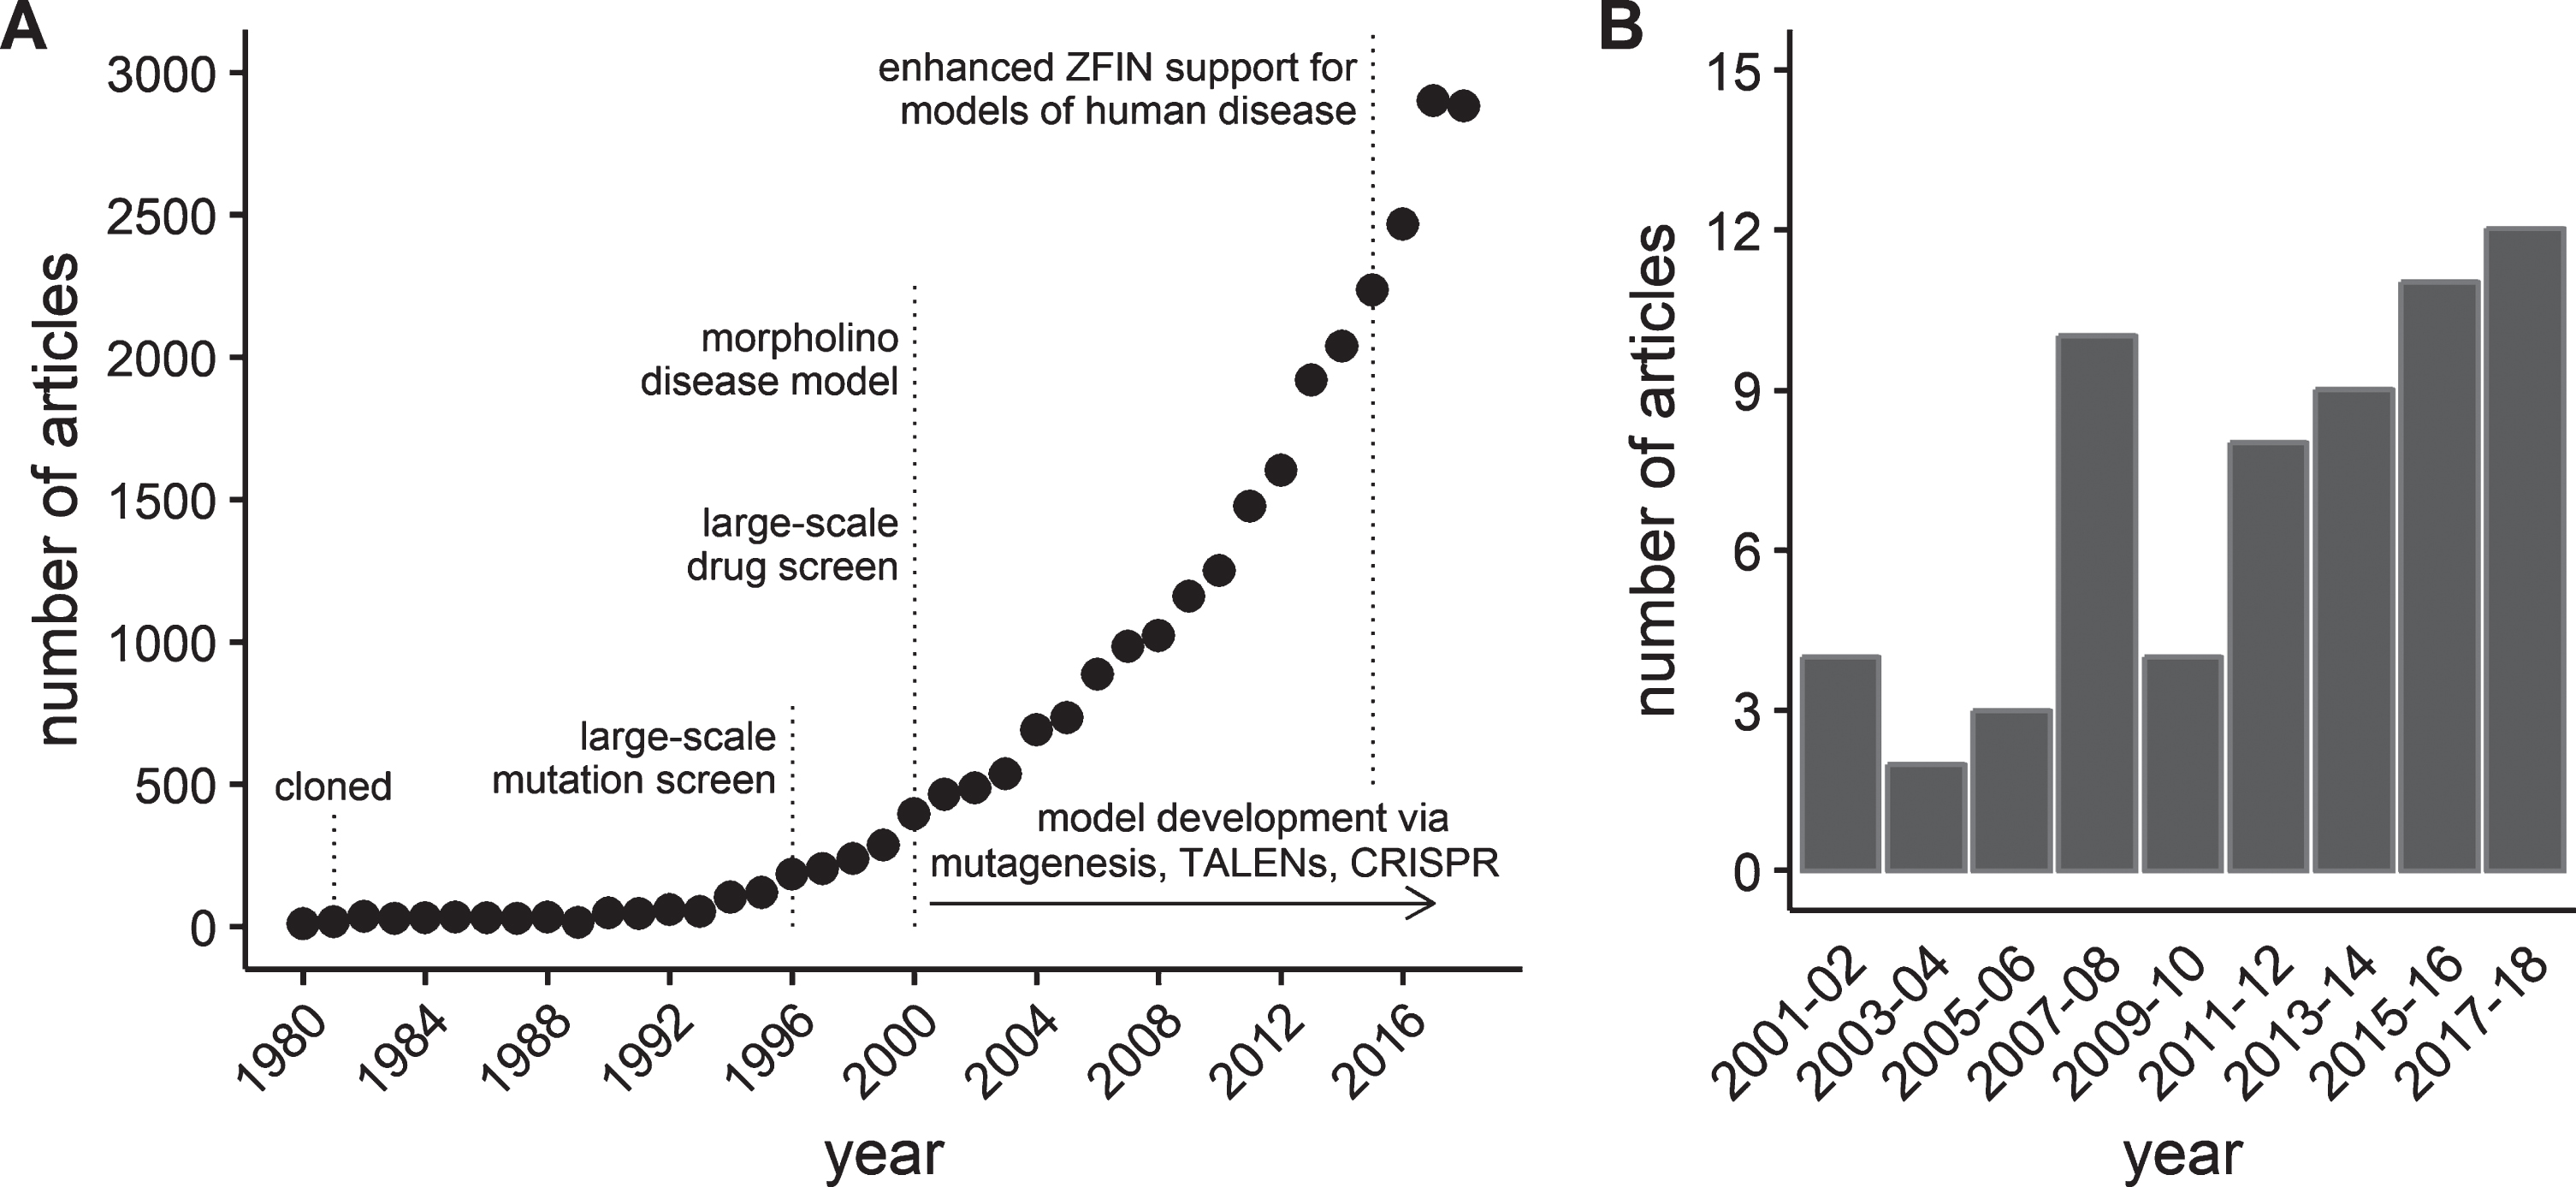 Growth of journal articles pertaining to zebrafish and muscular dystrophy research. Data obtained by searching the publication database maintained by the Zebrafish Information Network (ZFIN). (A) The number of journal articles by publication year from 1980 through 2018. (B) The number of journal articles containing the term “muscular dystrophy” in either the title or as a keyword between 2001 and 2018. Results grouped into 2 year periods to reduce noise.